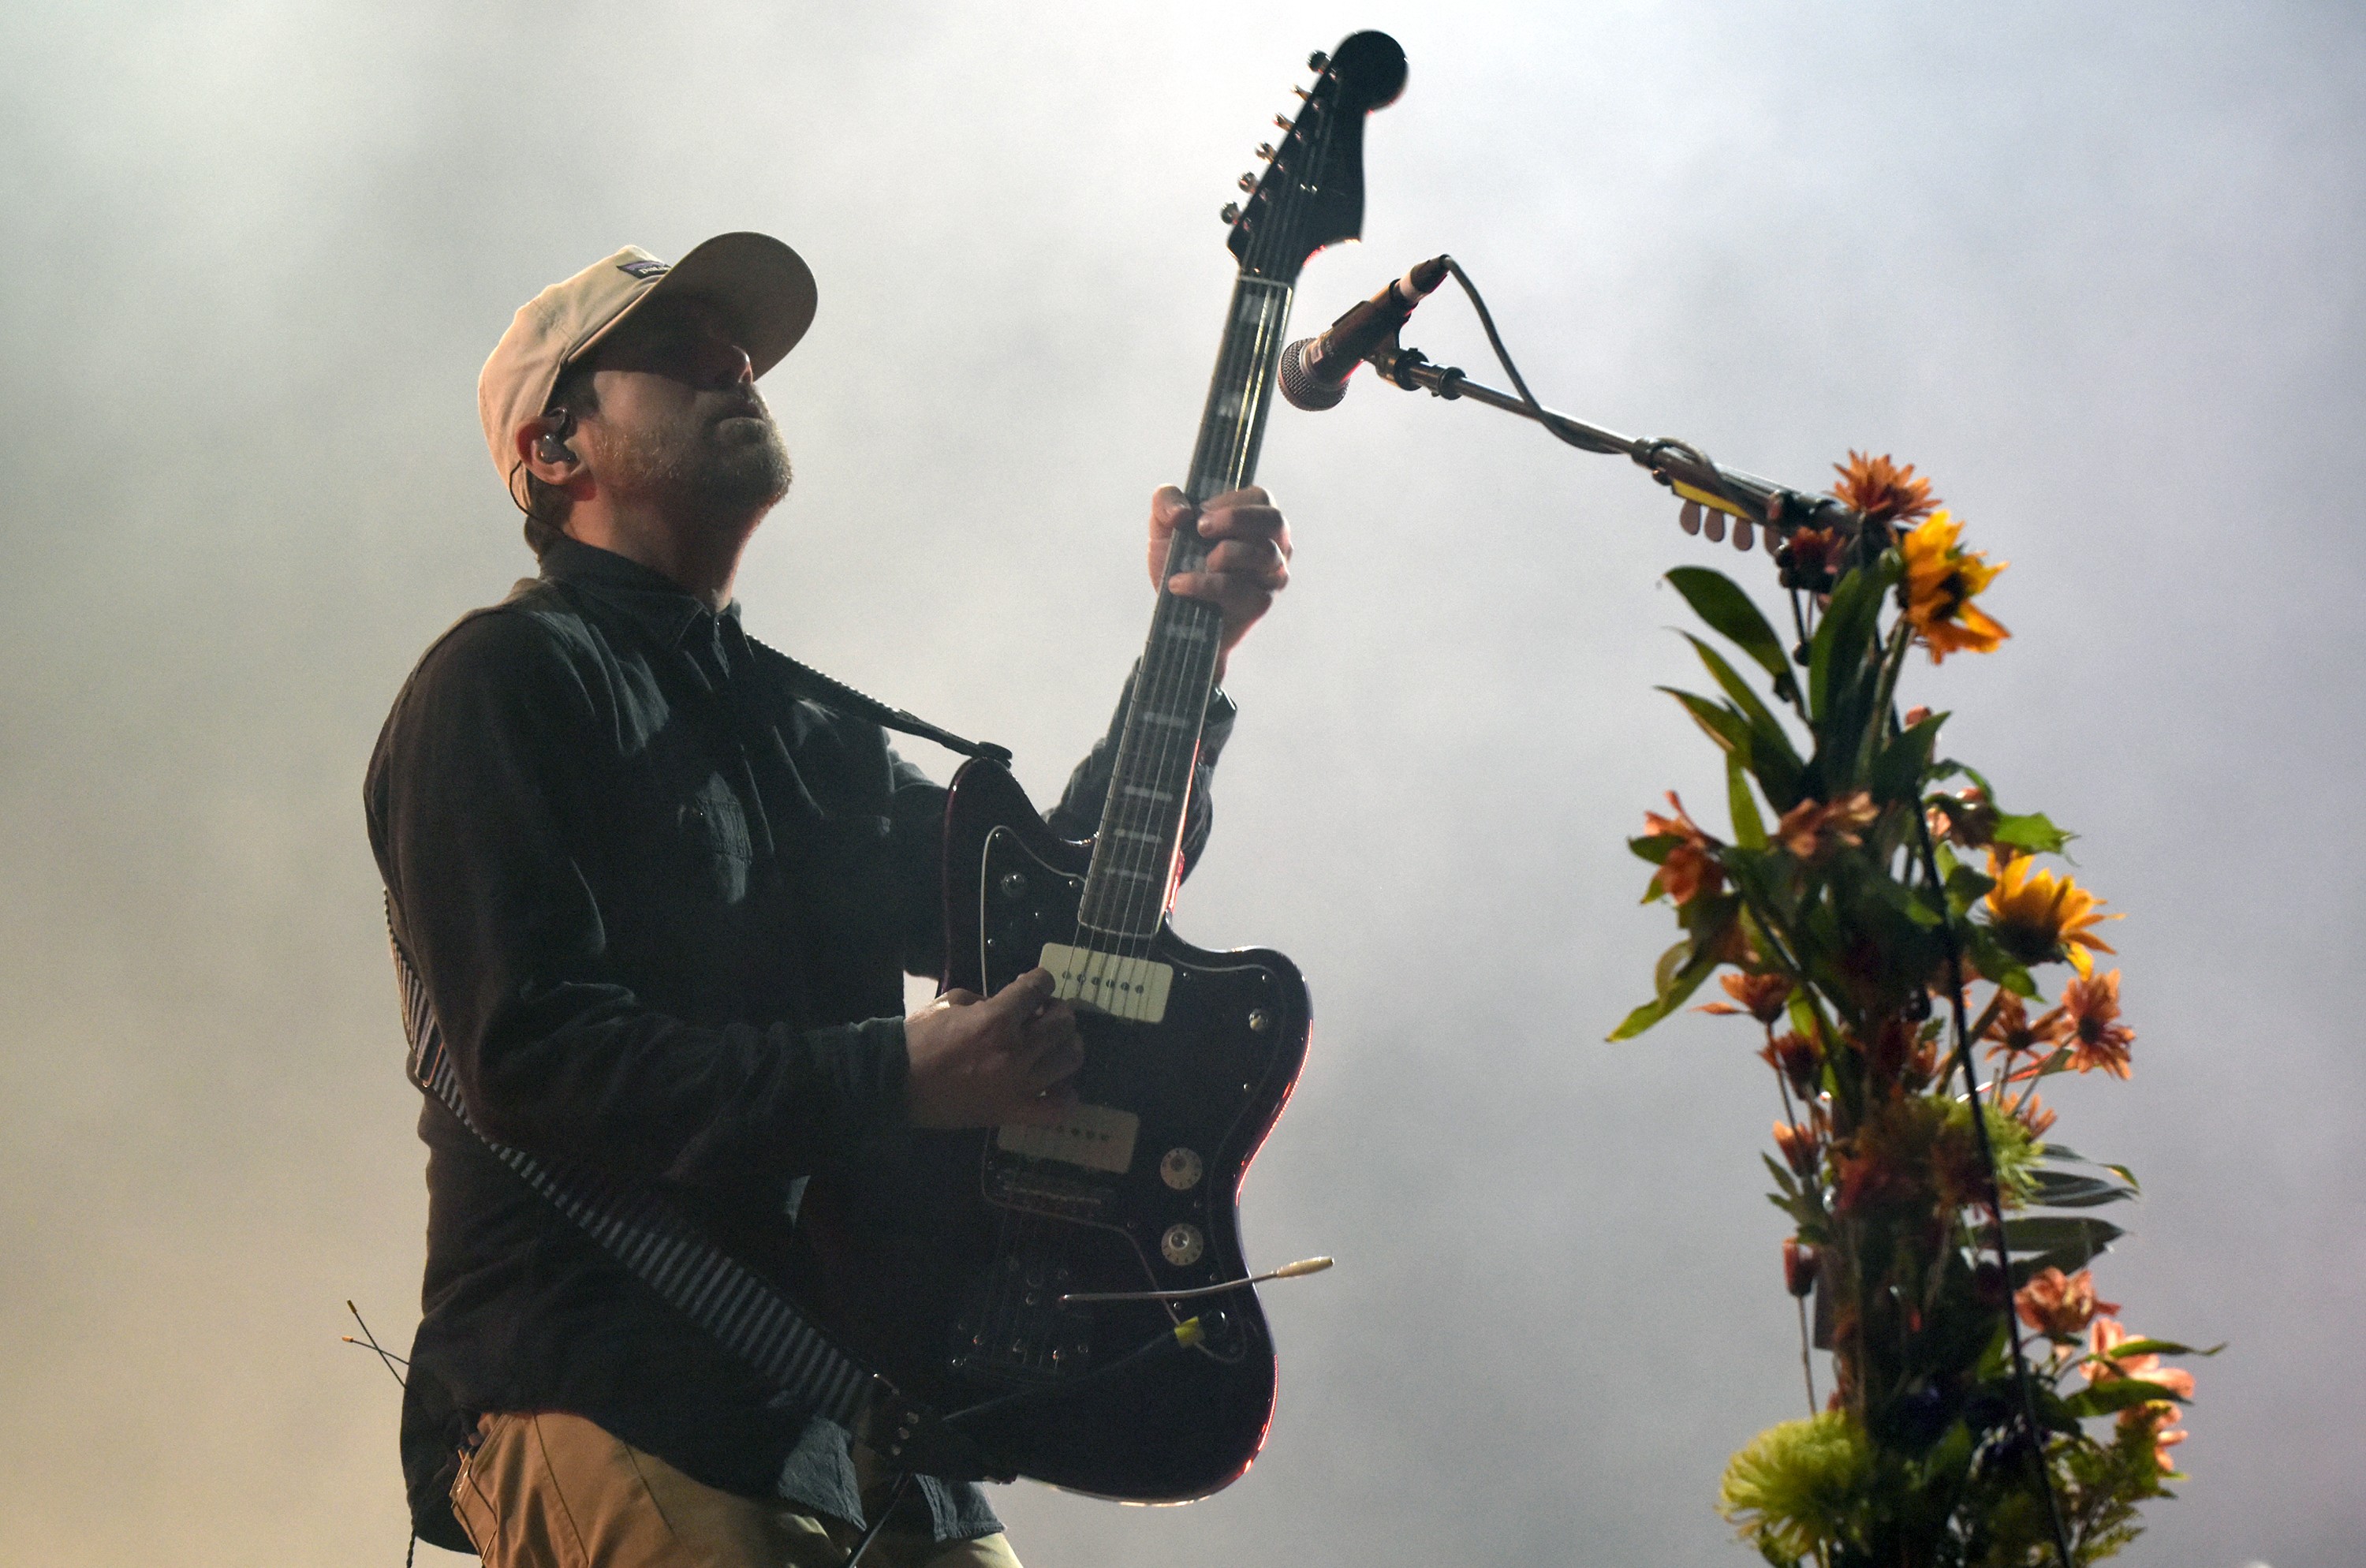 Brand New's Jesse Lacey Issues Statement Following Sexual